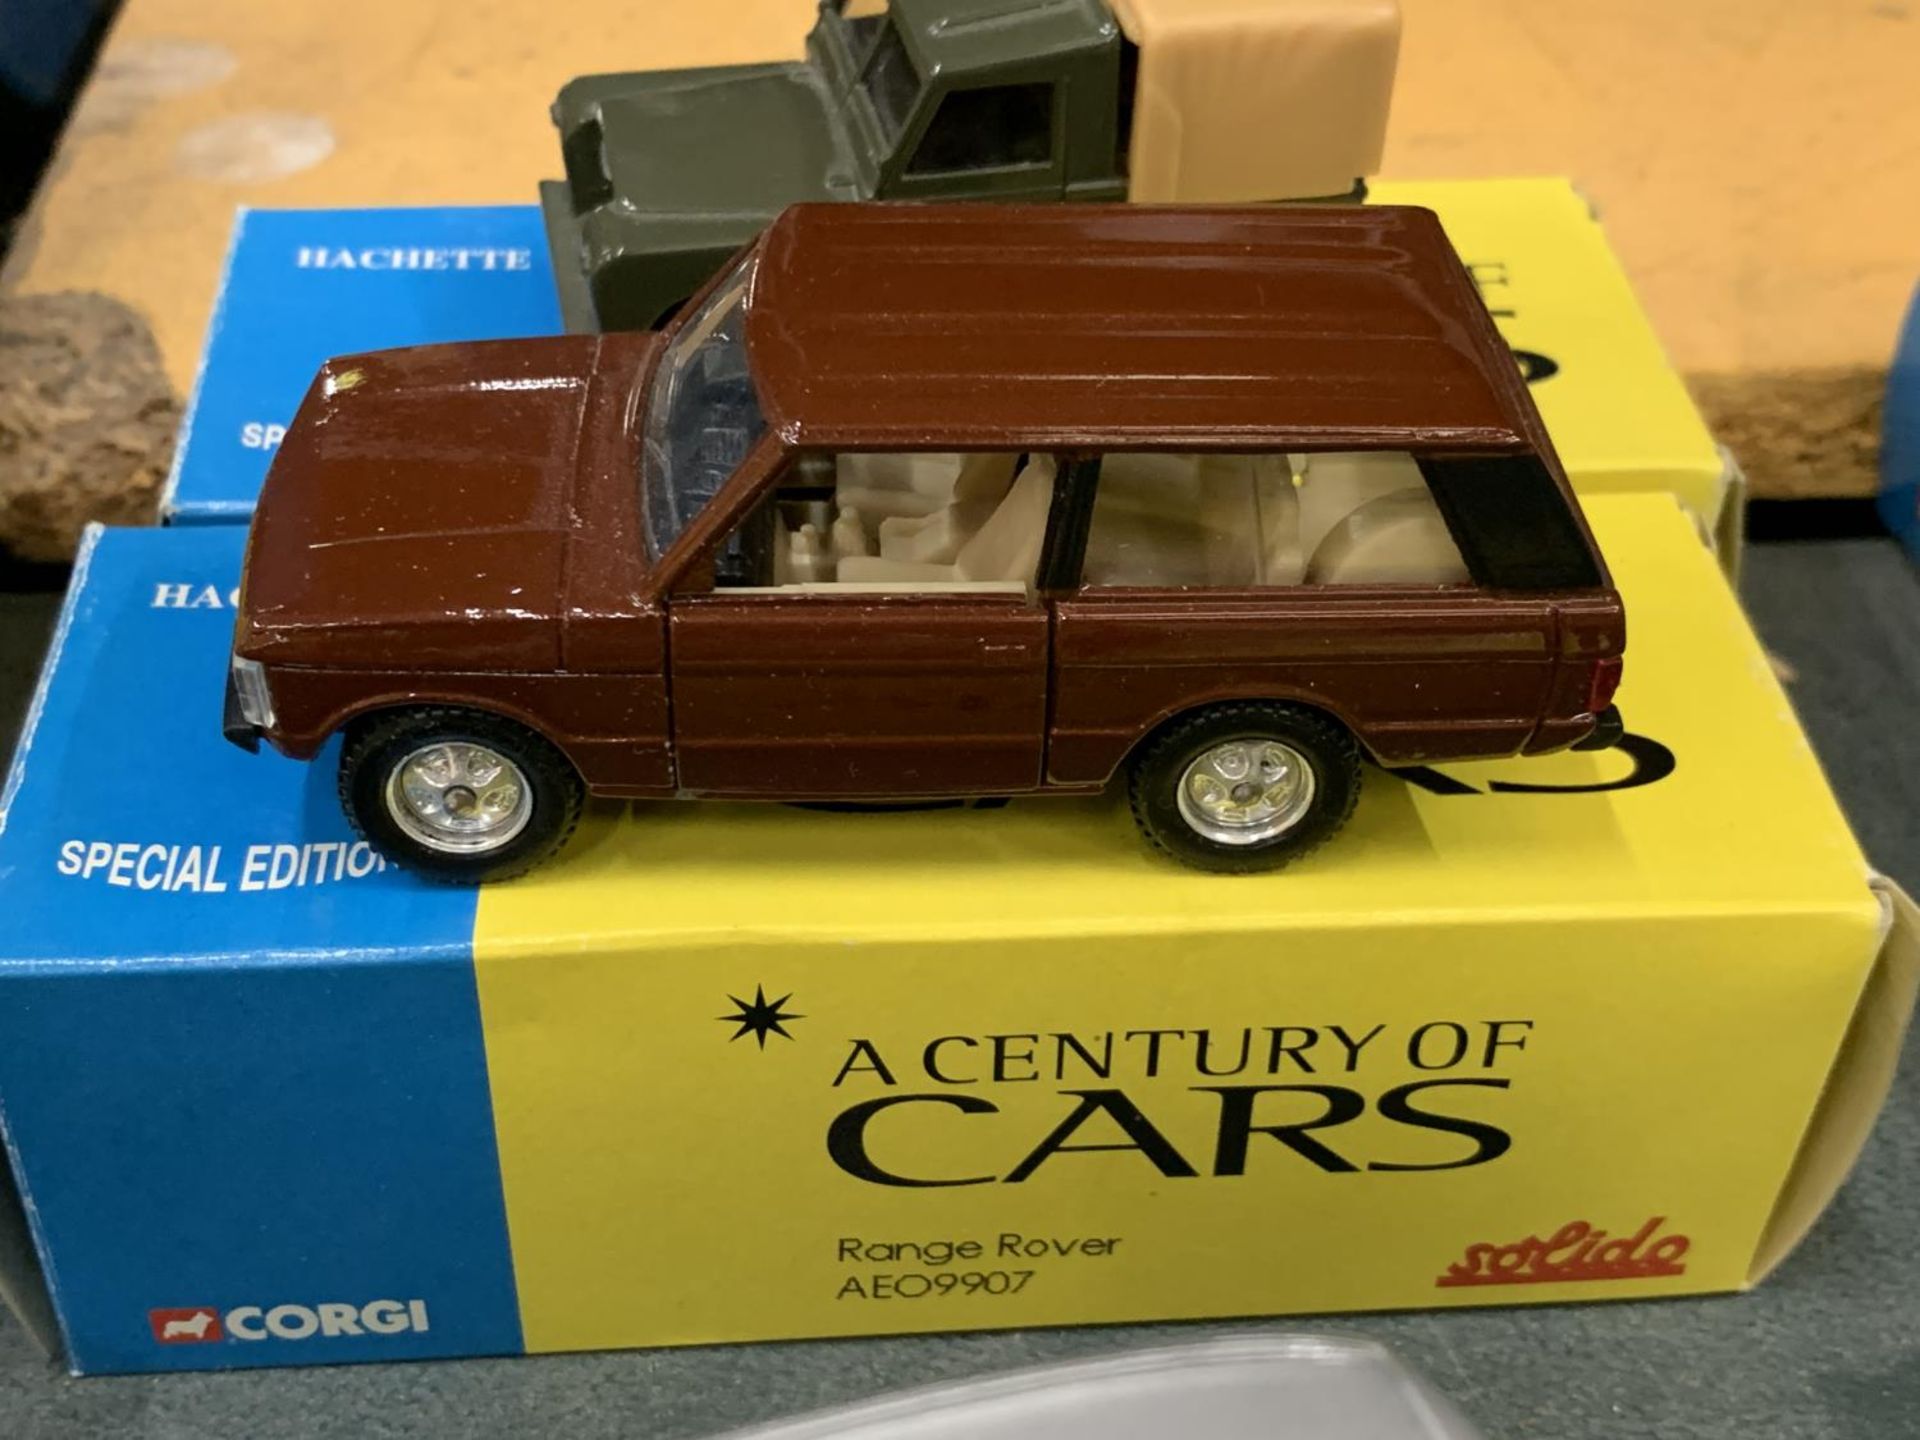 TWO BOXED CORGI 'A CENTURY OF CARS' TO INCLUDE A LANDROVER ADD7088 AND A RANGE ROVER AE09907 - Image 3 of 3